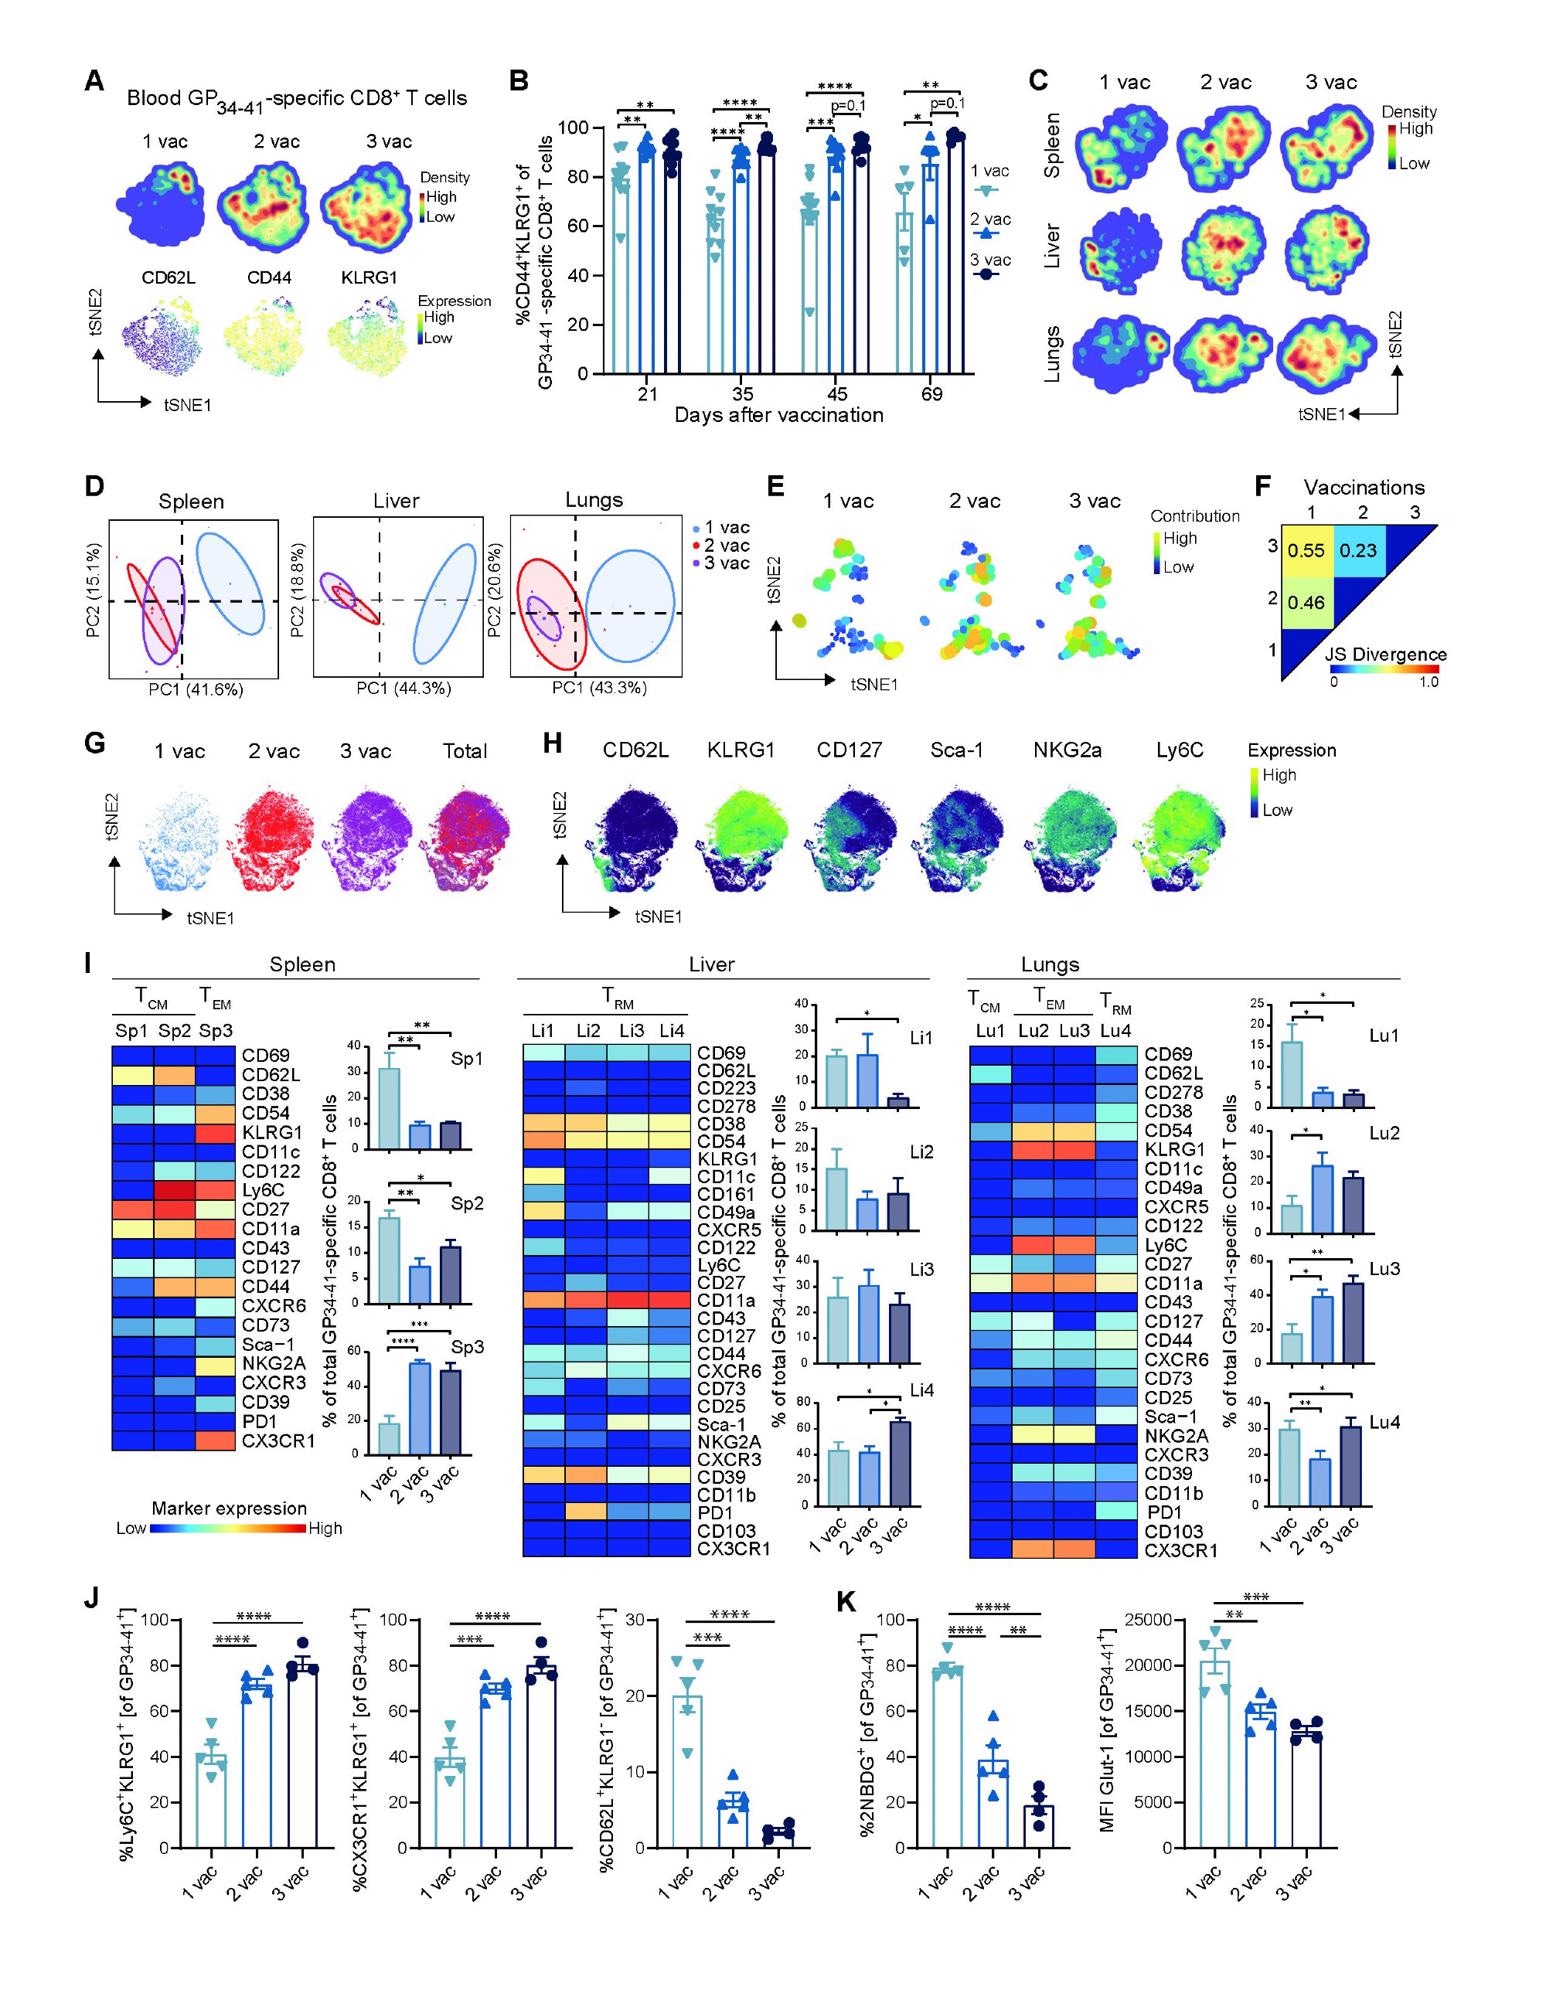 Boosting impact on the phenotype of vaccine-specific CD8+ T cells. (A) tSNE maps describing the local probability density of GP34-41-specific CD8+ T cells stained for CD62L, CD44, KLRG1 at day 71 after 1, 2 and 3 vaccinations. (B) Frequencies of CD44+ KLRG1+ GP34-41-specific CD8+ T cells in blood. Bar graphs represent means ± SEM. Symbols represent individual mice. (C) tSNE maps describing the local probability density of GP34-41-specific CD8+ T cells in spleen, liver and lungs stained at day 71 after 1, 2 and 3 vaccinations with the mass cytometry panel. (D) Principal Component Analysis illustrating the phenotypic dissimilarity of GP34-41-specific CD8+ T cells per tissue upon multiple vaccinations. (E) tSNE maps showing GP34-41-specific CD8+ T cell clusters per vaccination. Clusters with similar composition profiles across samples end up close together in the map. The varying dot size and color in this cluster tSNE map shows the average cluster normalized frequencies per vaccination/tissue group. (F) Pairwise Jensen-Shannon Divergence plots of the tSNE map obtained from all samples of GP34- 41-specific CD8+ T cells grouped by vaccinations. (G) tSNE embedding of GP34-41-specific CD8+ T cells isolated from vaccinated mice and multiple tissues in one analysis. Cells are color coded per vaccination. (H) Expression intensity of the cell-surface markers on the GP34-41-specific CD8+ T cells. The color of the cells indicates ArcSinh5-transformed expression values for a given marker analyzed. (I) Heat maps of GP34-41- specific CD8+ T cell clusters in the spleen, liver and lungs of mice that received multiple vaccinations. Clusters were selected based on their significant difference and categorized in TCM, TEM and TRM subsets. Bar graphs indicate the average percentage (+ SEM) of each CD8+ T cell cluster within the GP34-41-specific CD8+ T-cell population elicited by one, two and three vaccinations. (J) Cell surface marker (Ly6C+ KLRG1+ , CX3CR1+ KLRG1+ and CD62L+ KLRG1- ) expression on GP34-41-specific CD8+ T cells at day 66 in spleen after 1, 2 or 3 vaccinations. Bar graphs represent means ± SEM. Symbols represent individual mice. Representative data of two independent experiments. (K) Glucose analog 2-(N-(7-nitrobenz-2-oxa-1,3-diazol-4-yl)amino)- 2-deoxyglucose (2-NBDG) uptake and GLUT1 expression of splenic GP34-41-specific CD8+ T cells at day 66 in after 1, 2 and 3 vaccinations. Symbols represent individual mice. Bar graphs represent means ± SEM. Representative data of two independent experiments. One-way ANOVA test with repeated measurements was used for statistical analysis. *P<0.05, **P<0.01, ***P<0.001, ****P<0.0001.